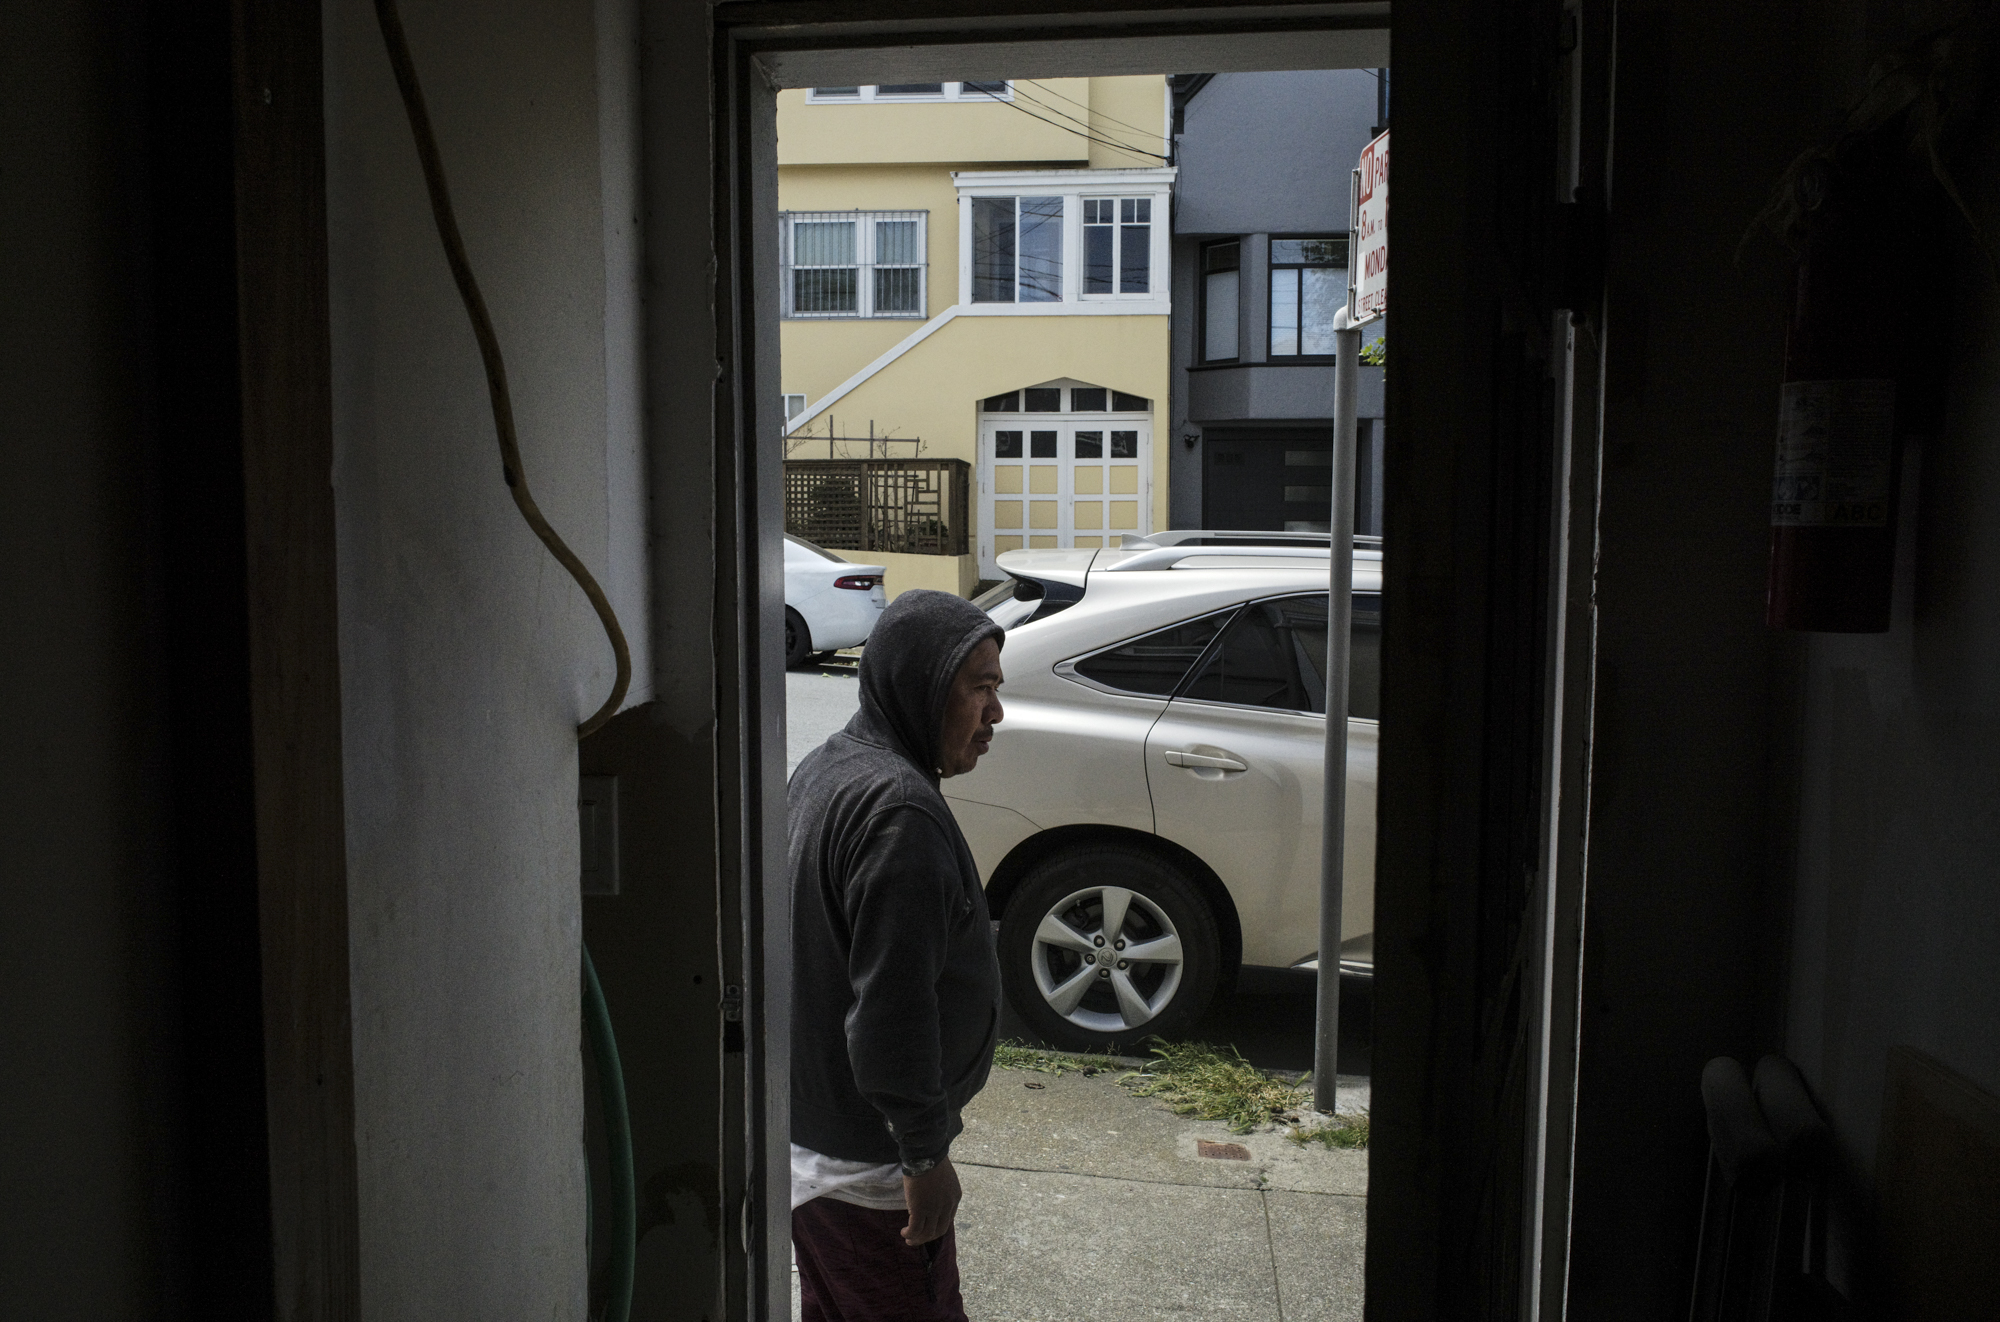 A middle-aged Latino man outside of his house, photographed from inside the house, with a car parked on the street outside his house.